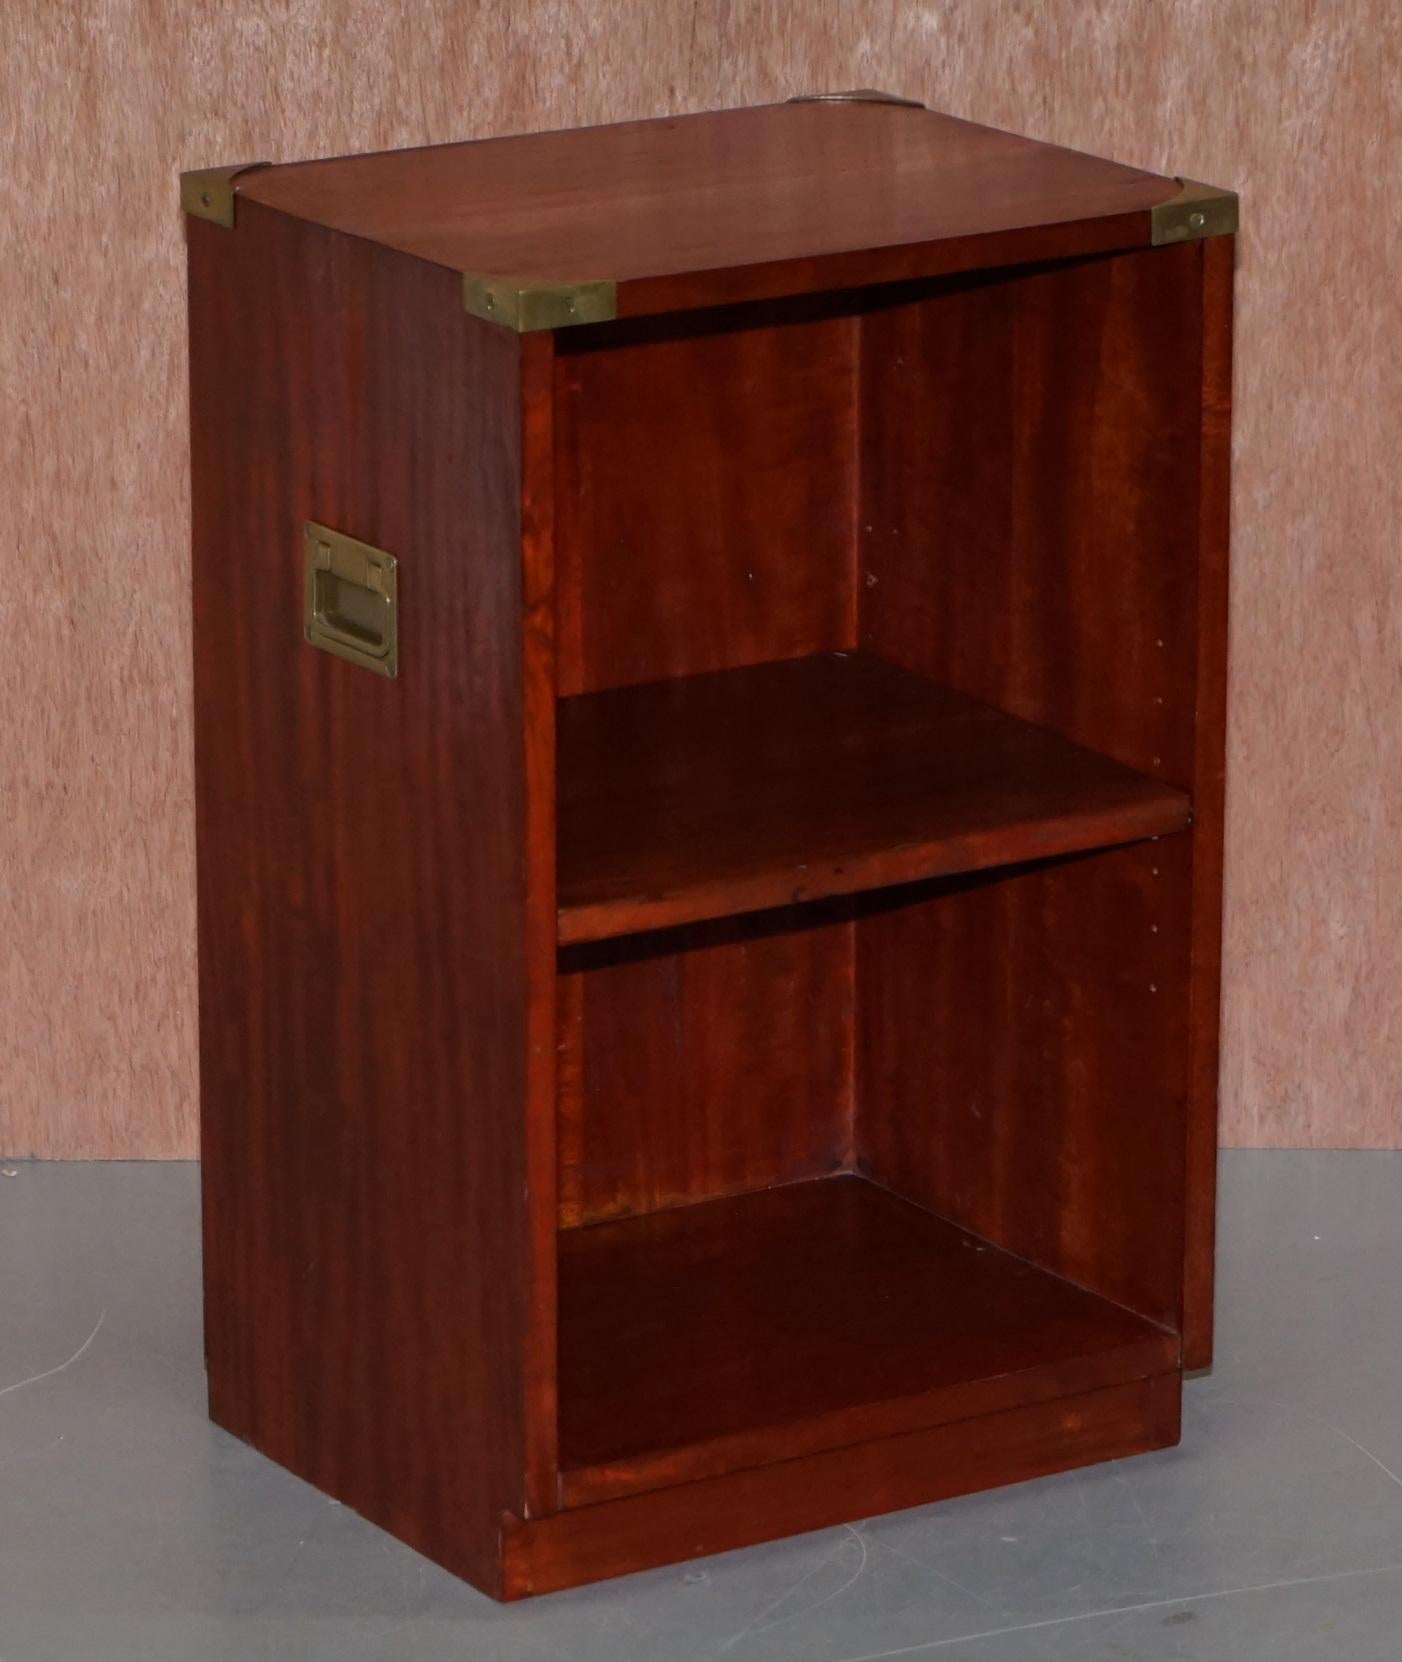 We are delighted to offer for sale this lovely pair of original vintage Kennedy Furniture side table sized bookcases retailed through Harrods London

In lovely flamed mahogany with solid brass fixtures and fittings, these are side table size and